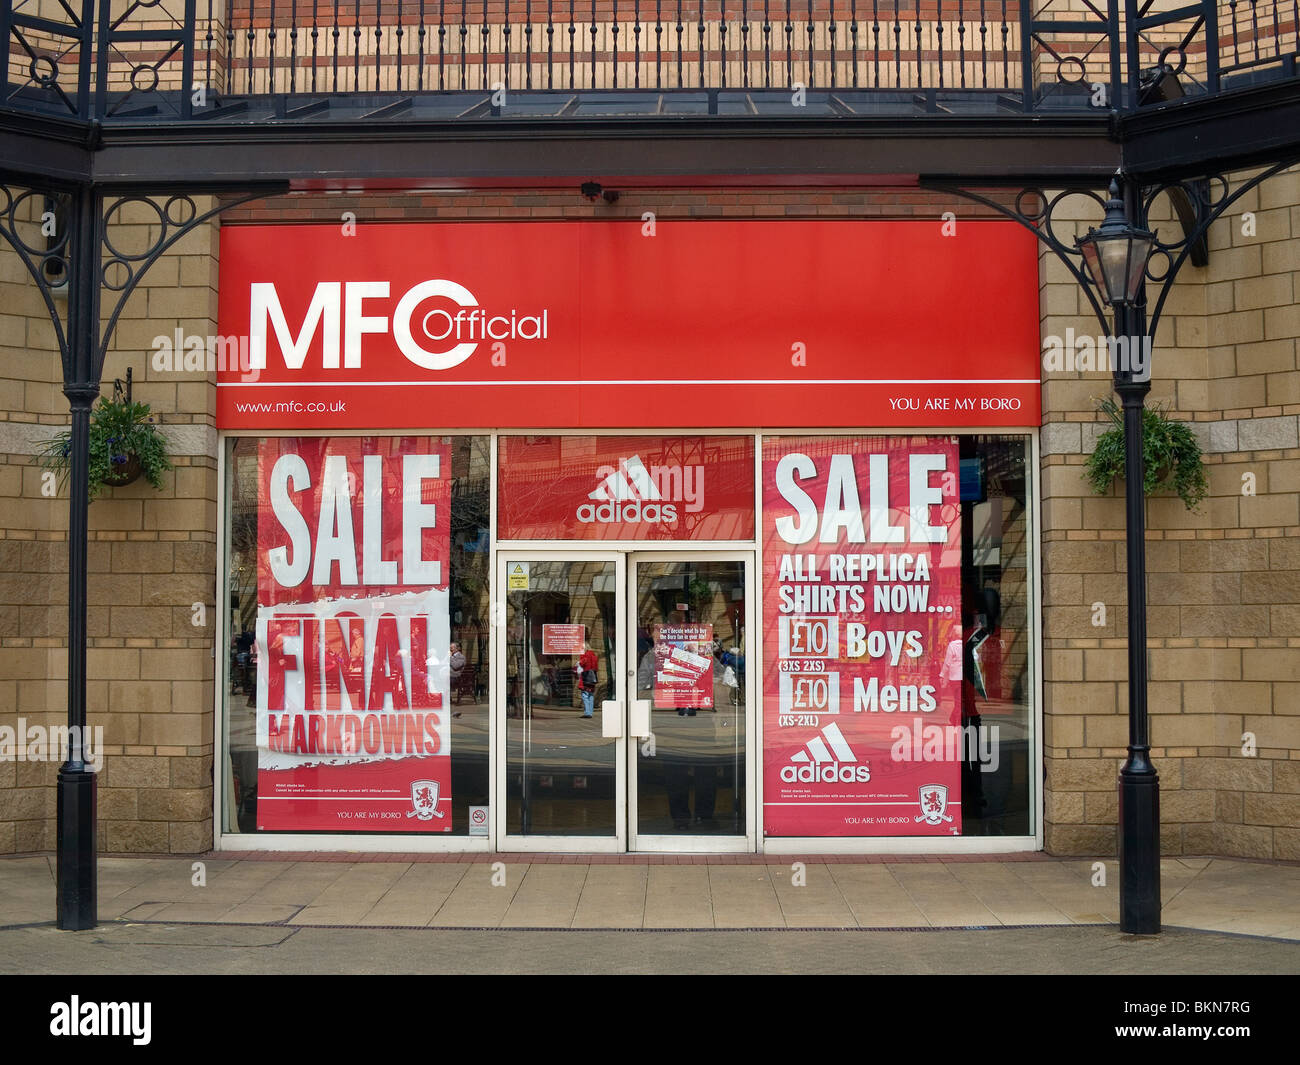 Middlesbrough Football club official shop in James Cook Square Middlesbrough with a sale of replica shirts Stock Photo